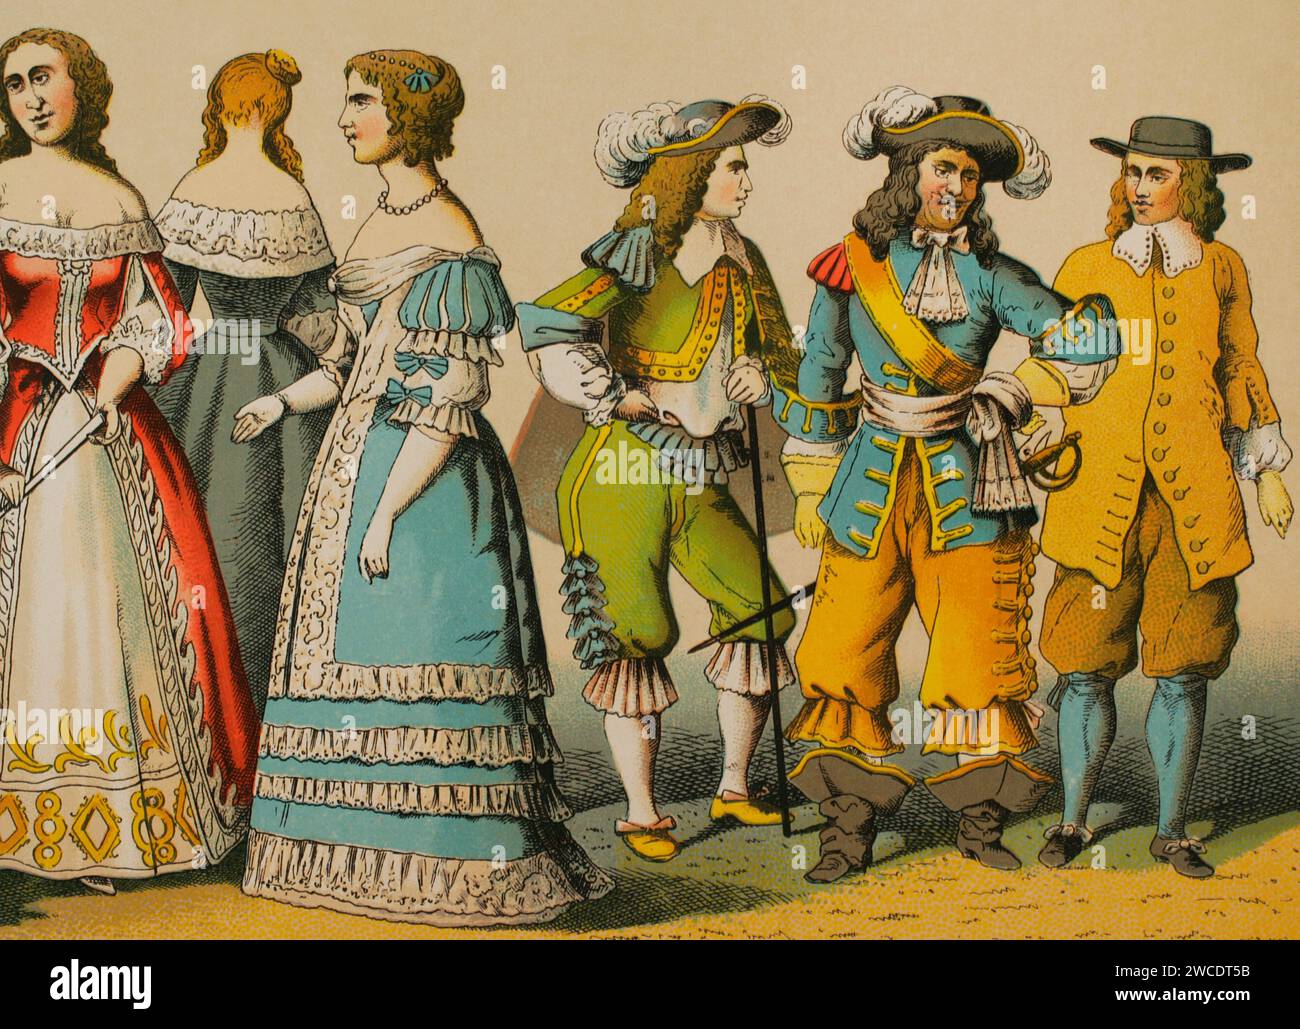 History of France. 1600-1670. From right to left, 1: merchant, 2: soldier, 3: knight, 4-5-6: noblewomen. Chromolithography. "Historia Universal", by César Cantú. Volume VIII, 1881. Stock Photo